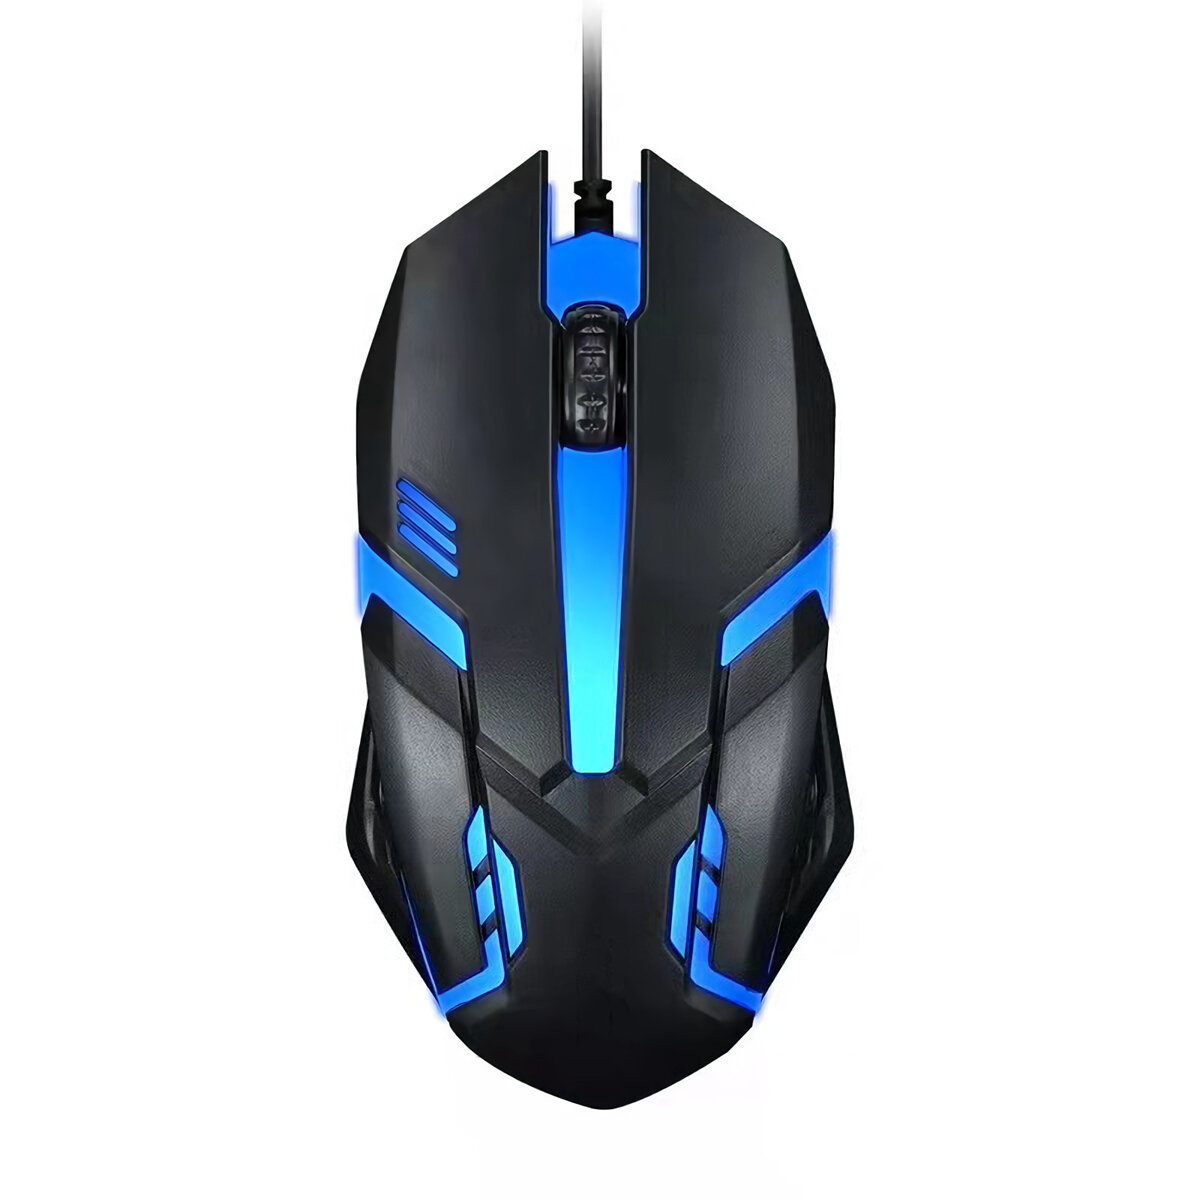 LEORQEON V0 Wired Game Mouse RGB 1200 DPI Gaming Mouse USB Wired Gamer Mice for Desktop Computer Lap